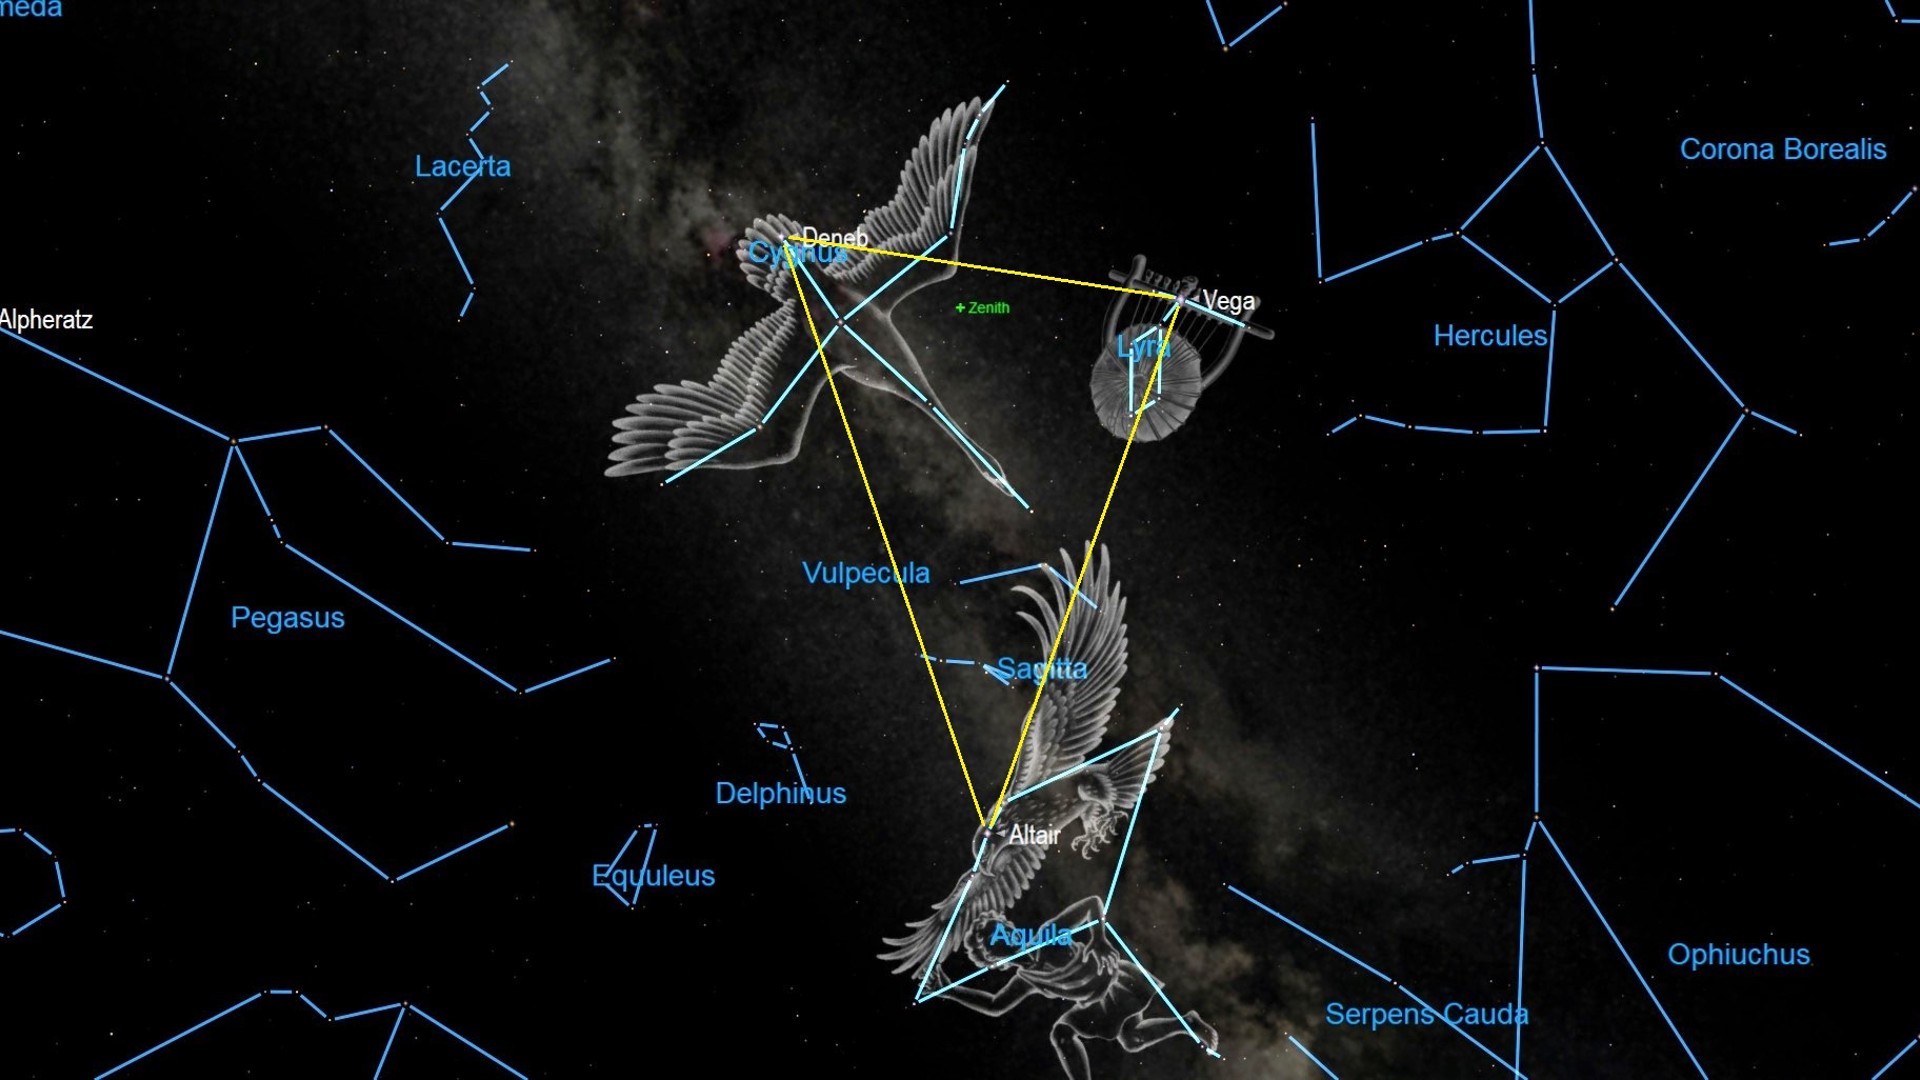 See the Summer Triangle asterism after dusk Wednedsay (Aug. 31 